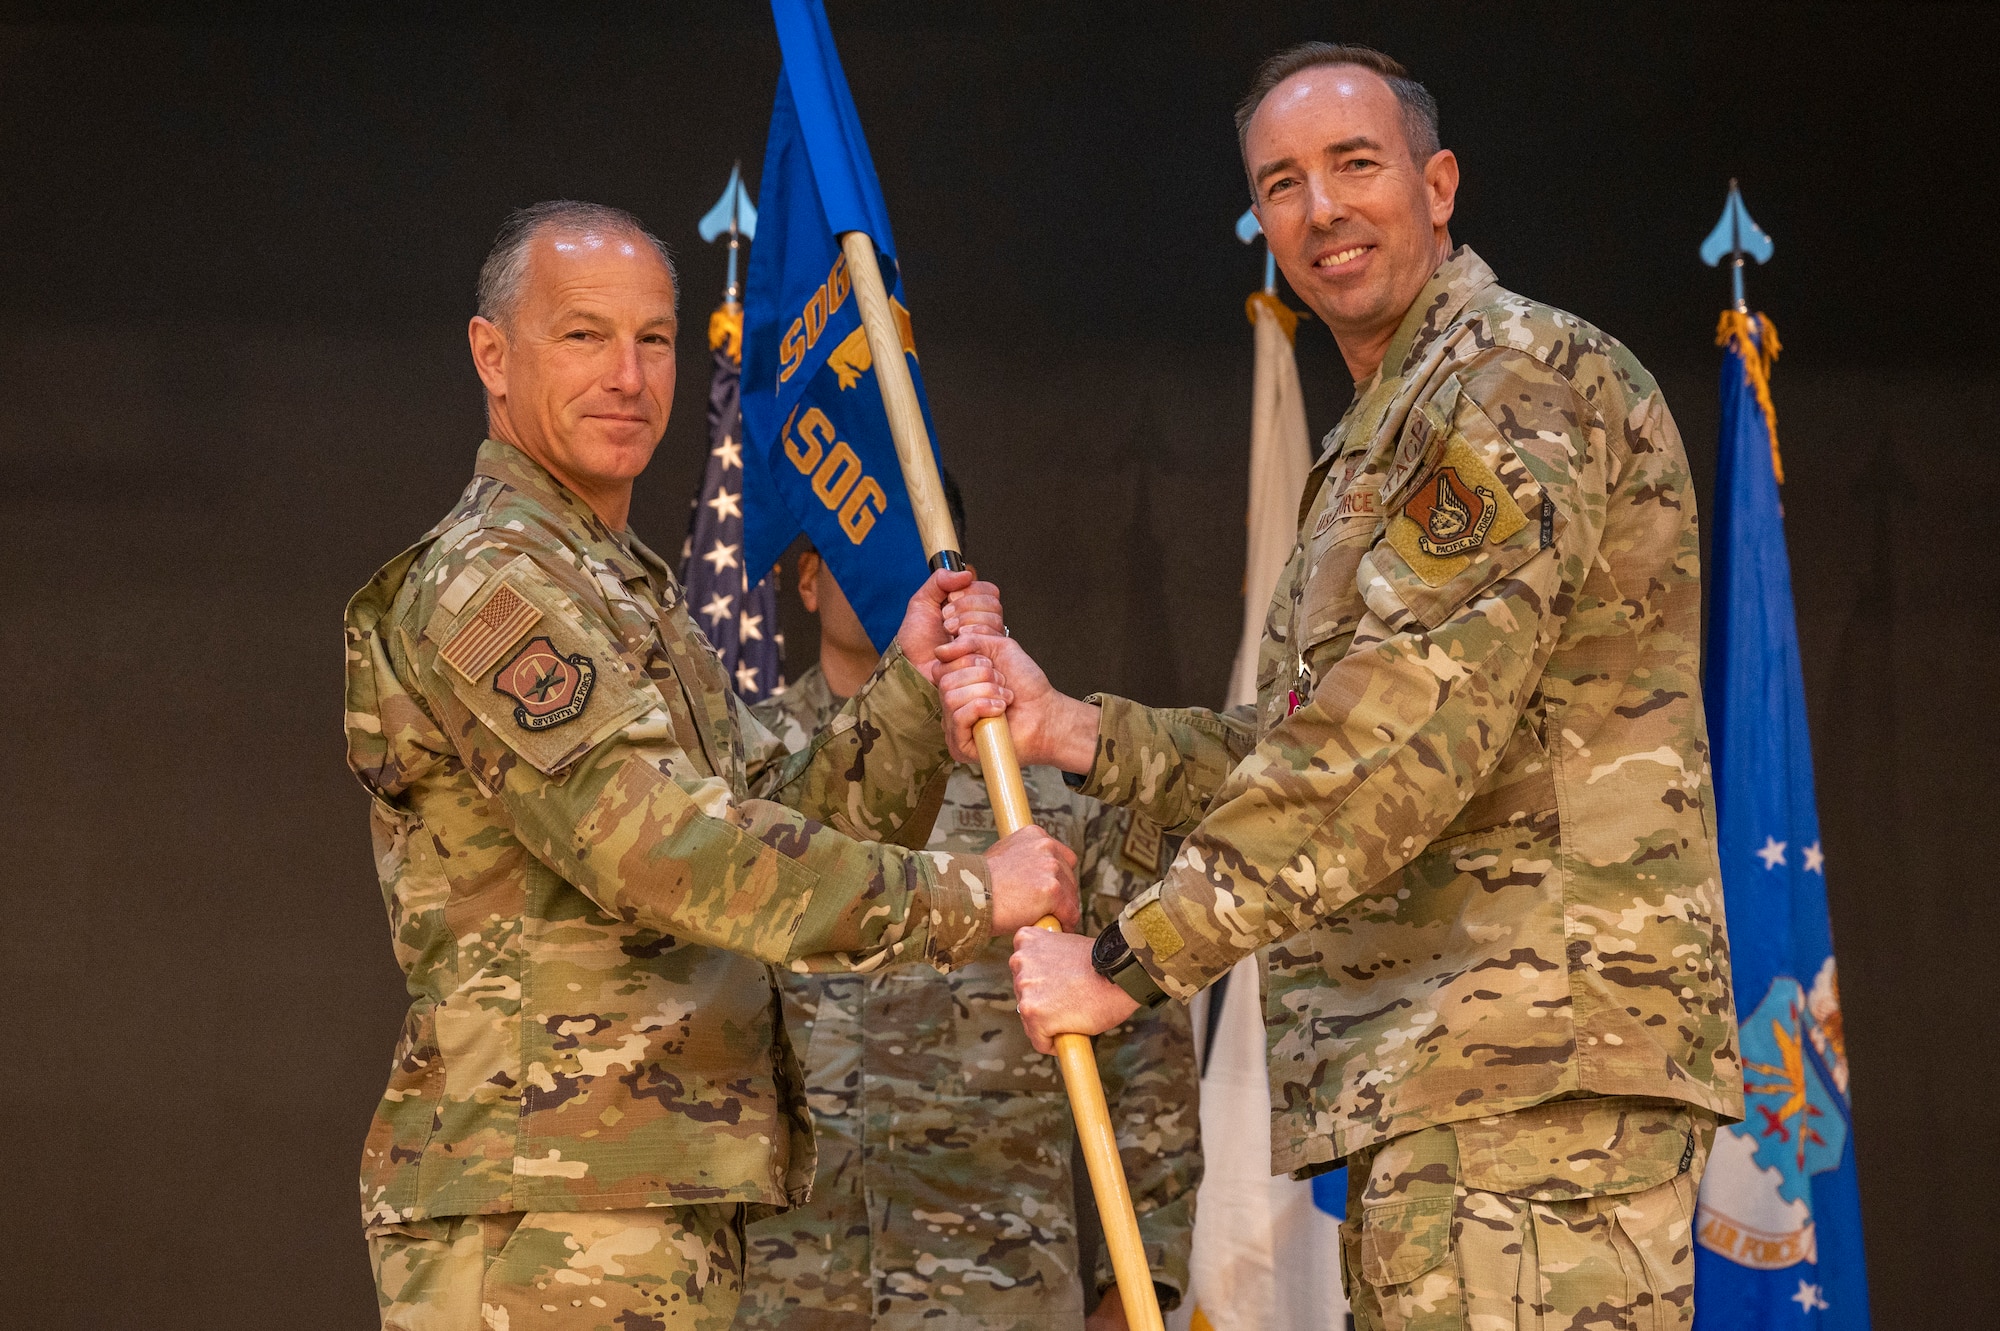 U.S. Air Force Lt. Gen. Scott Pleus, left, 7th Air Force commander, receives the guidon from Col. Scott Morgan, 607th Air Support Operations Group outgoing commander, at Osan Air Base, Republic of Korea, June 26, 2023. In a change of command ceremony, the guidon symbolizes the transfer of command, the authority and responsibility associated with it.  (U.S. Air Force photo by Senior Airman Aaron Edwards)